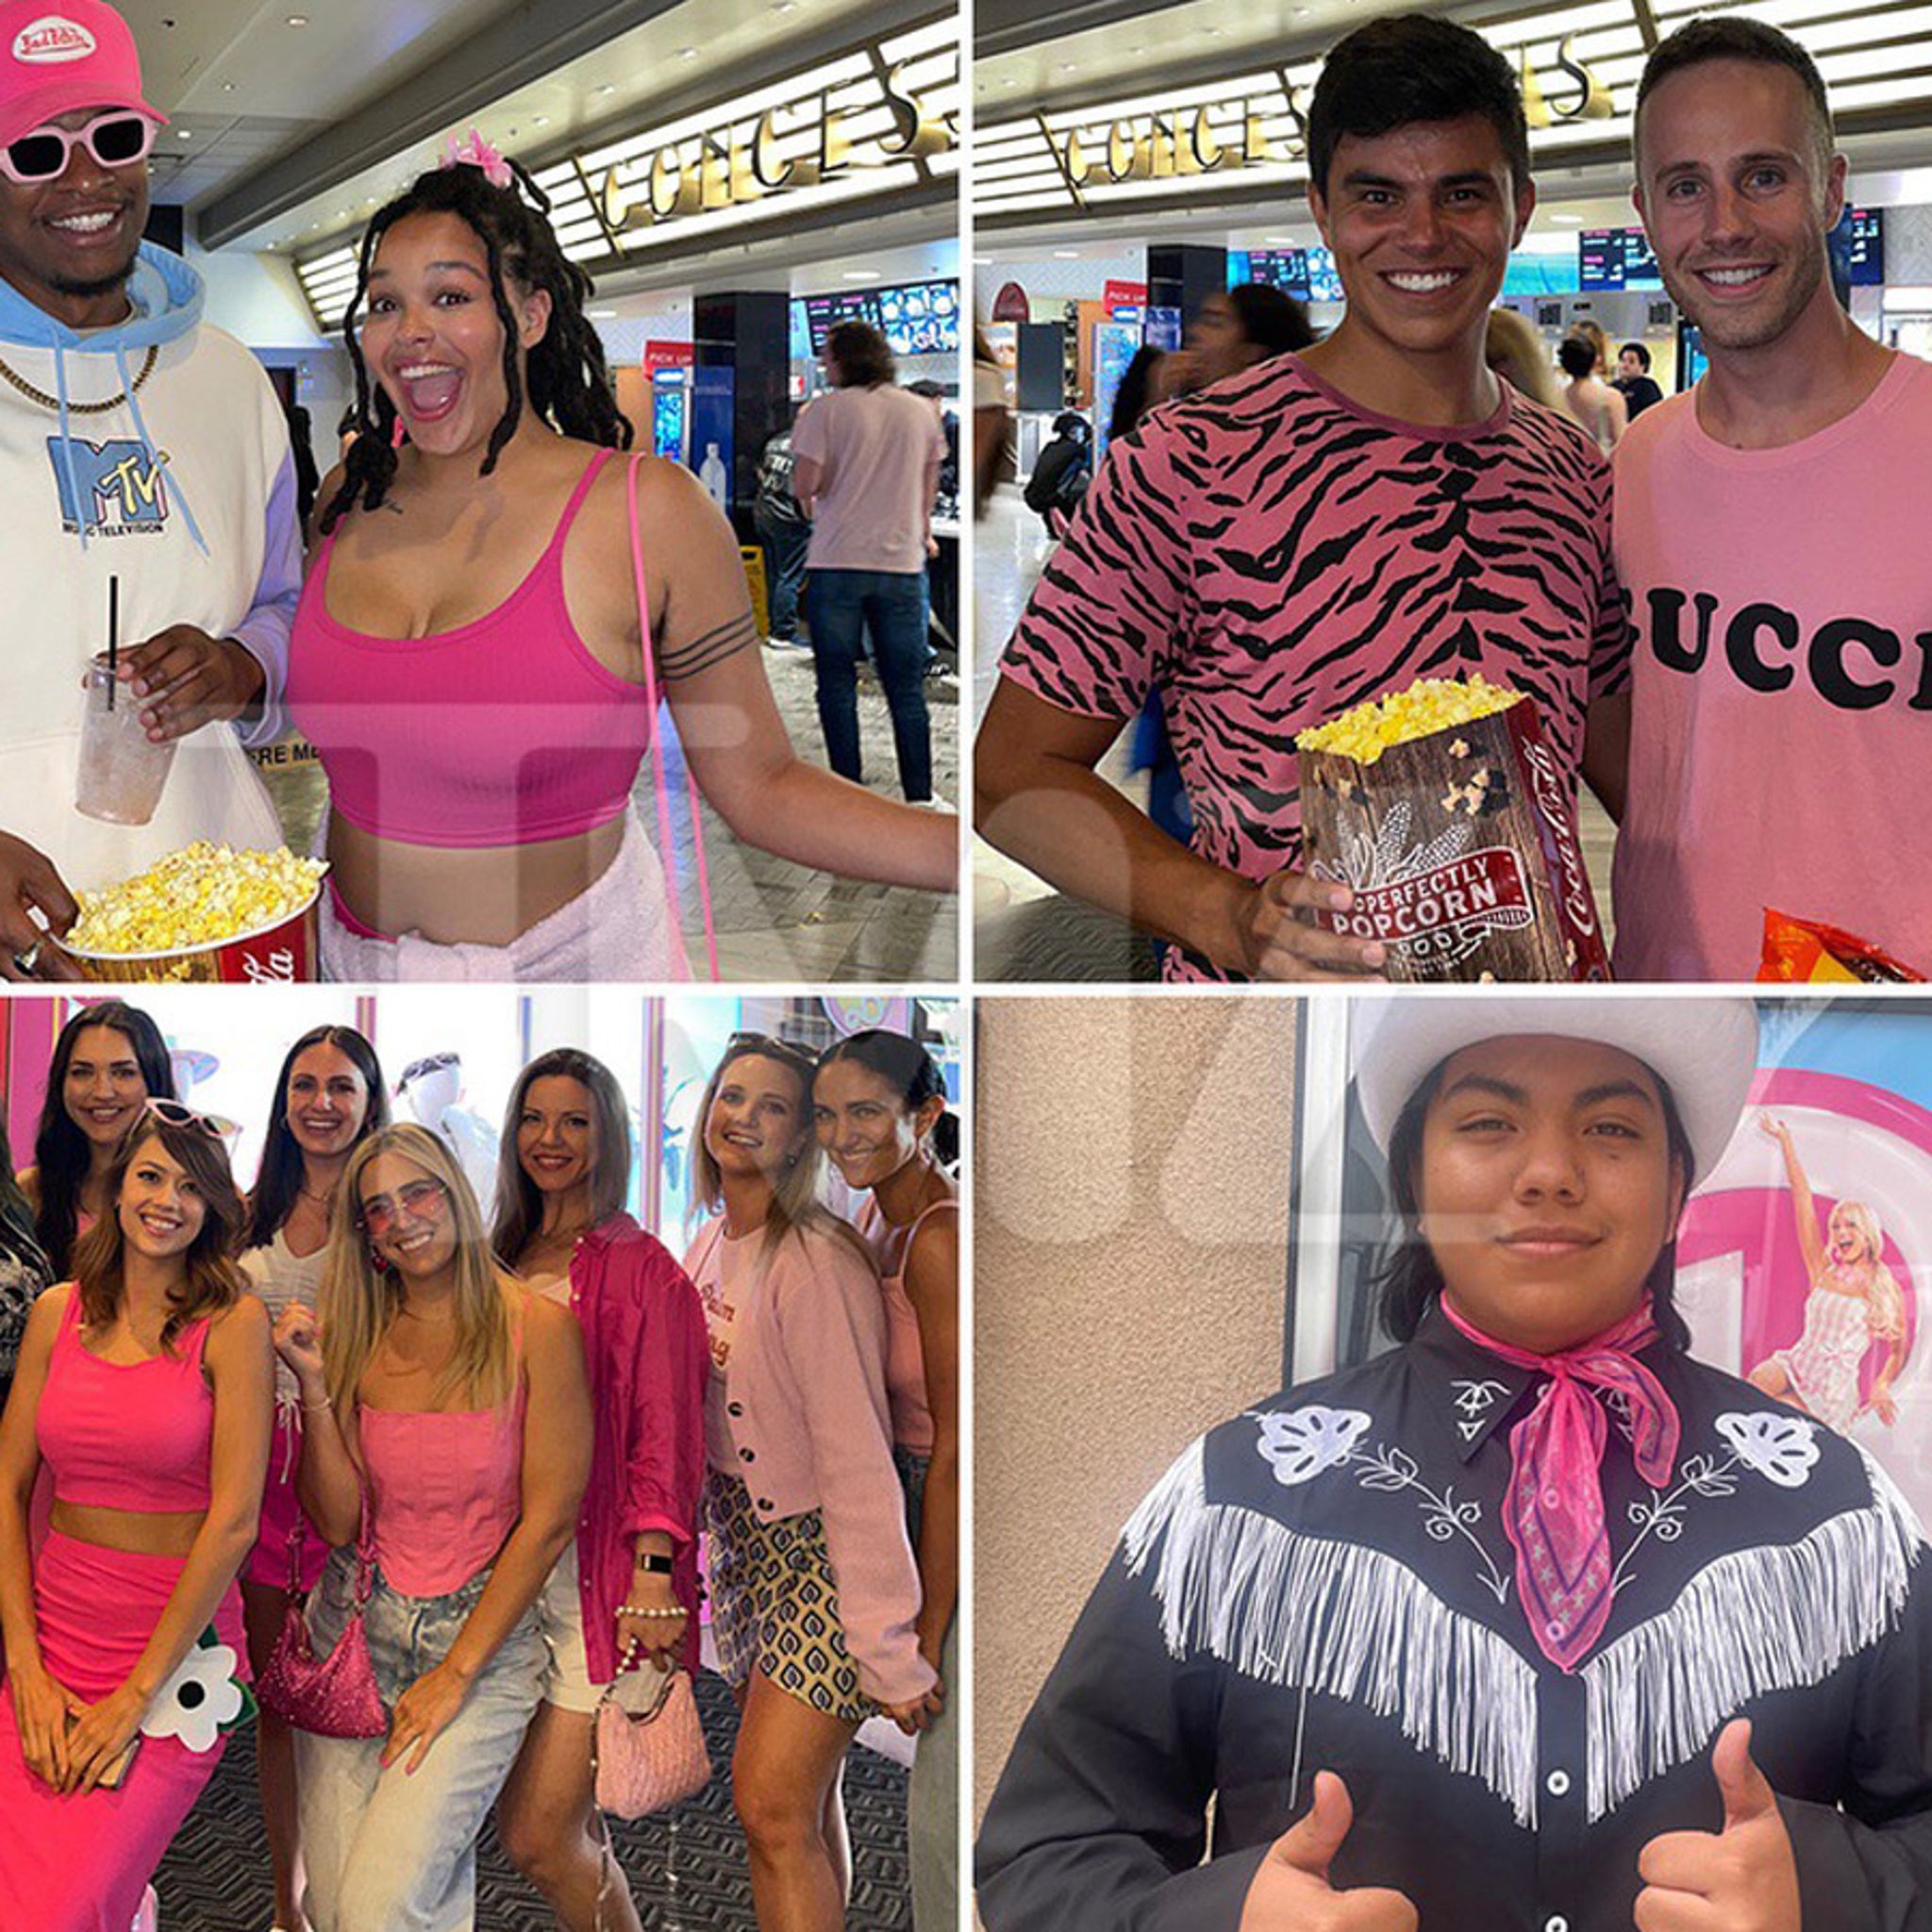 Why People Are Dressing Up To See The Barbie Movie